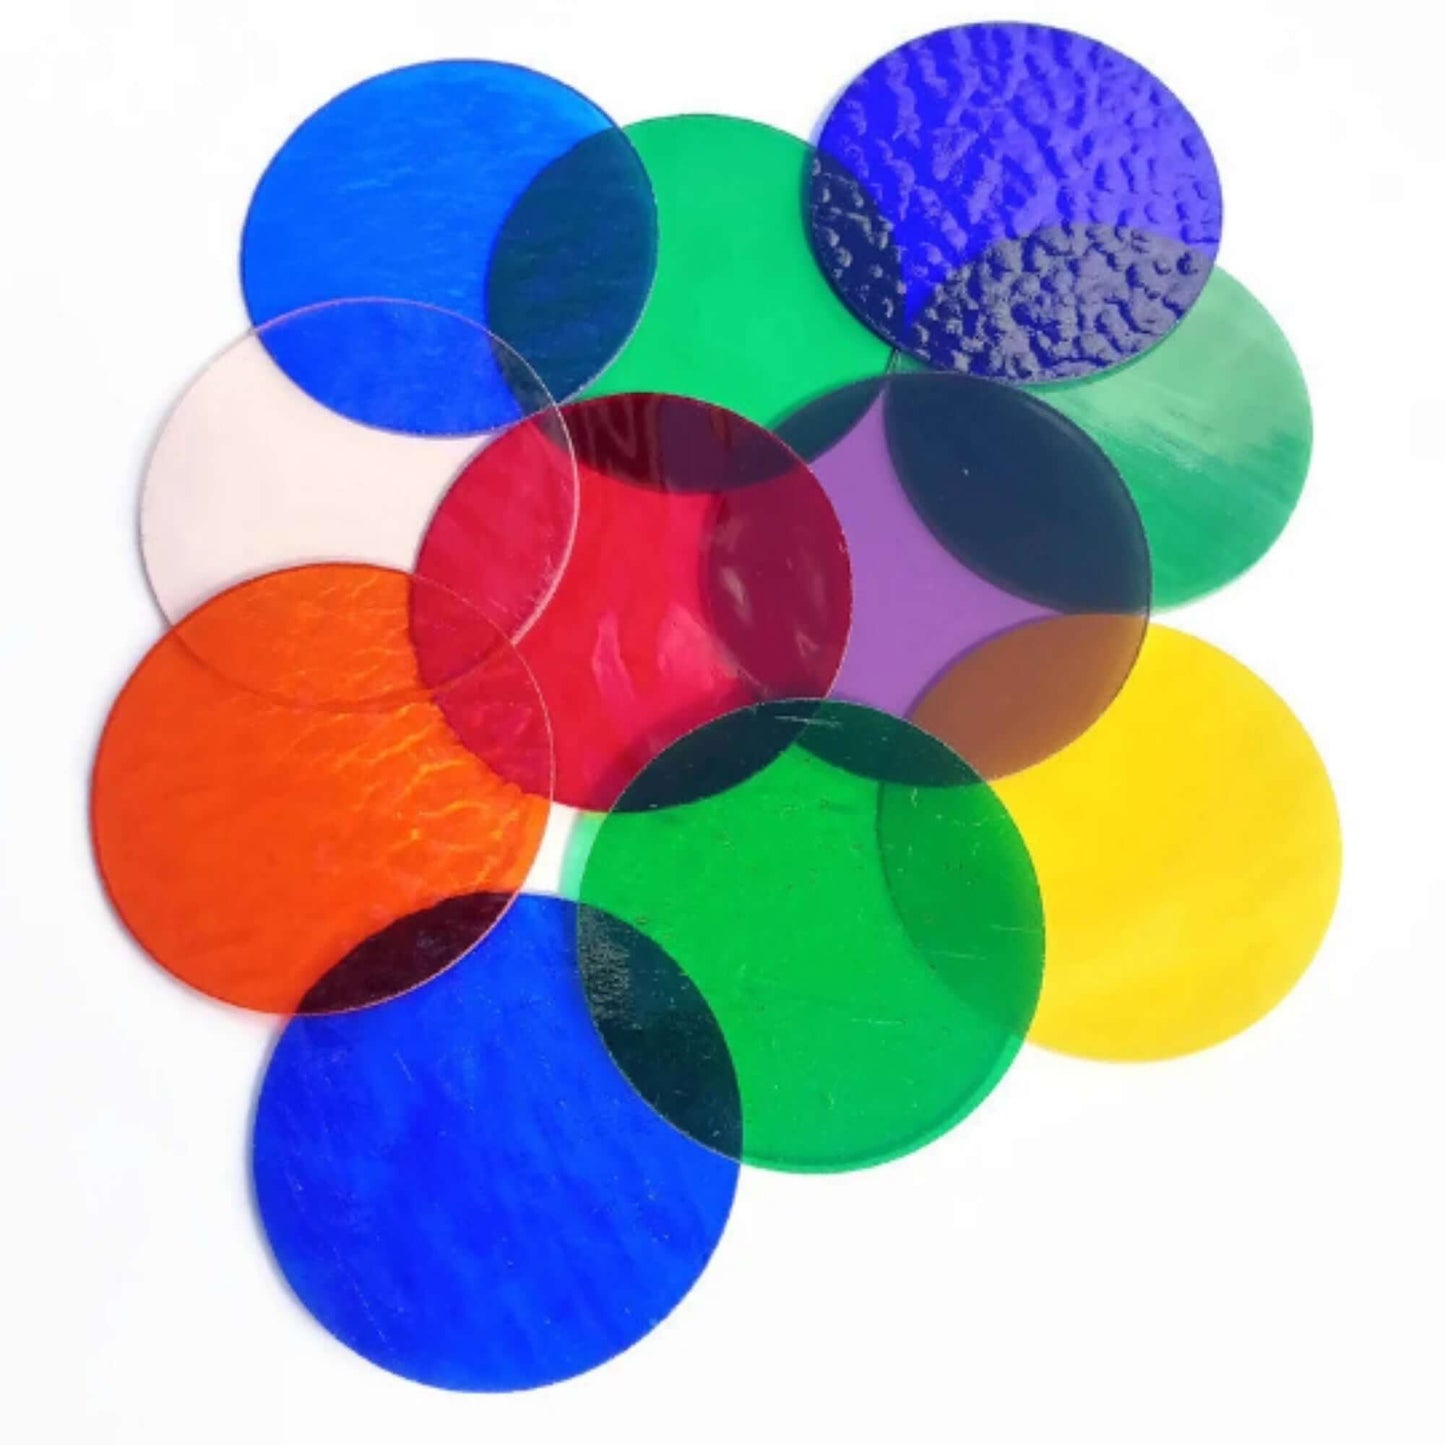 Precut Stained Glass Circles, 3" Diameter Glass Circles in Assorted Colors